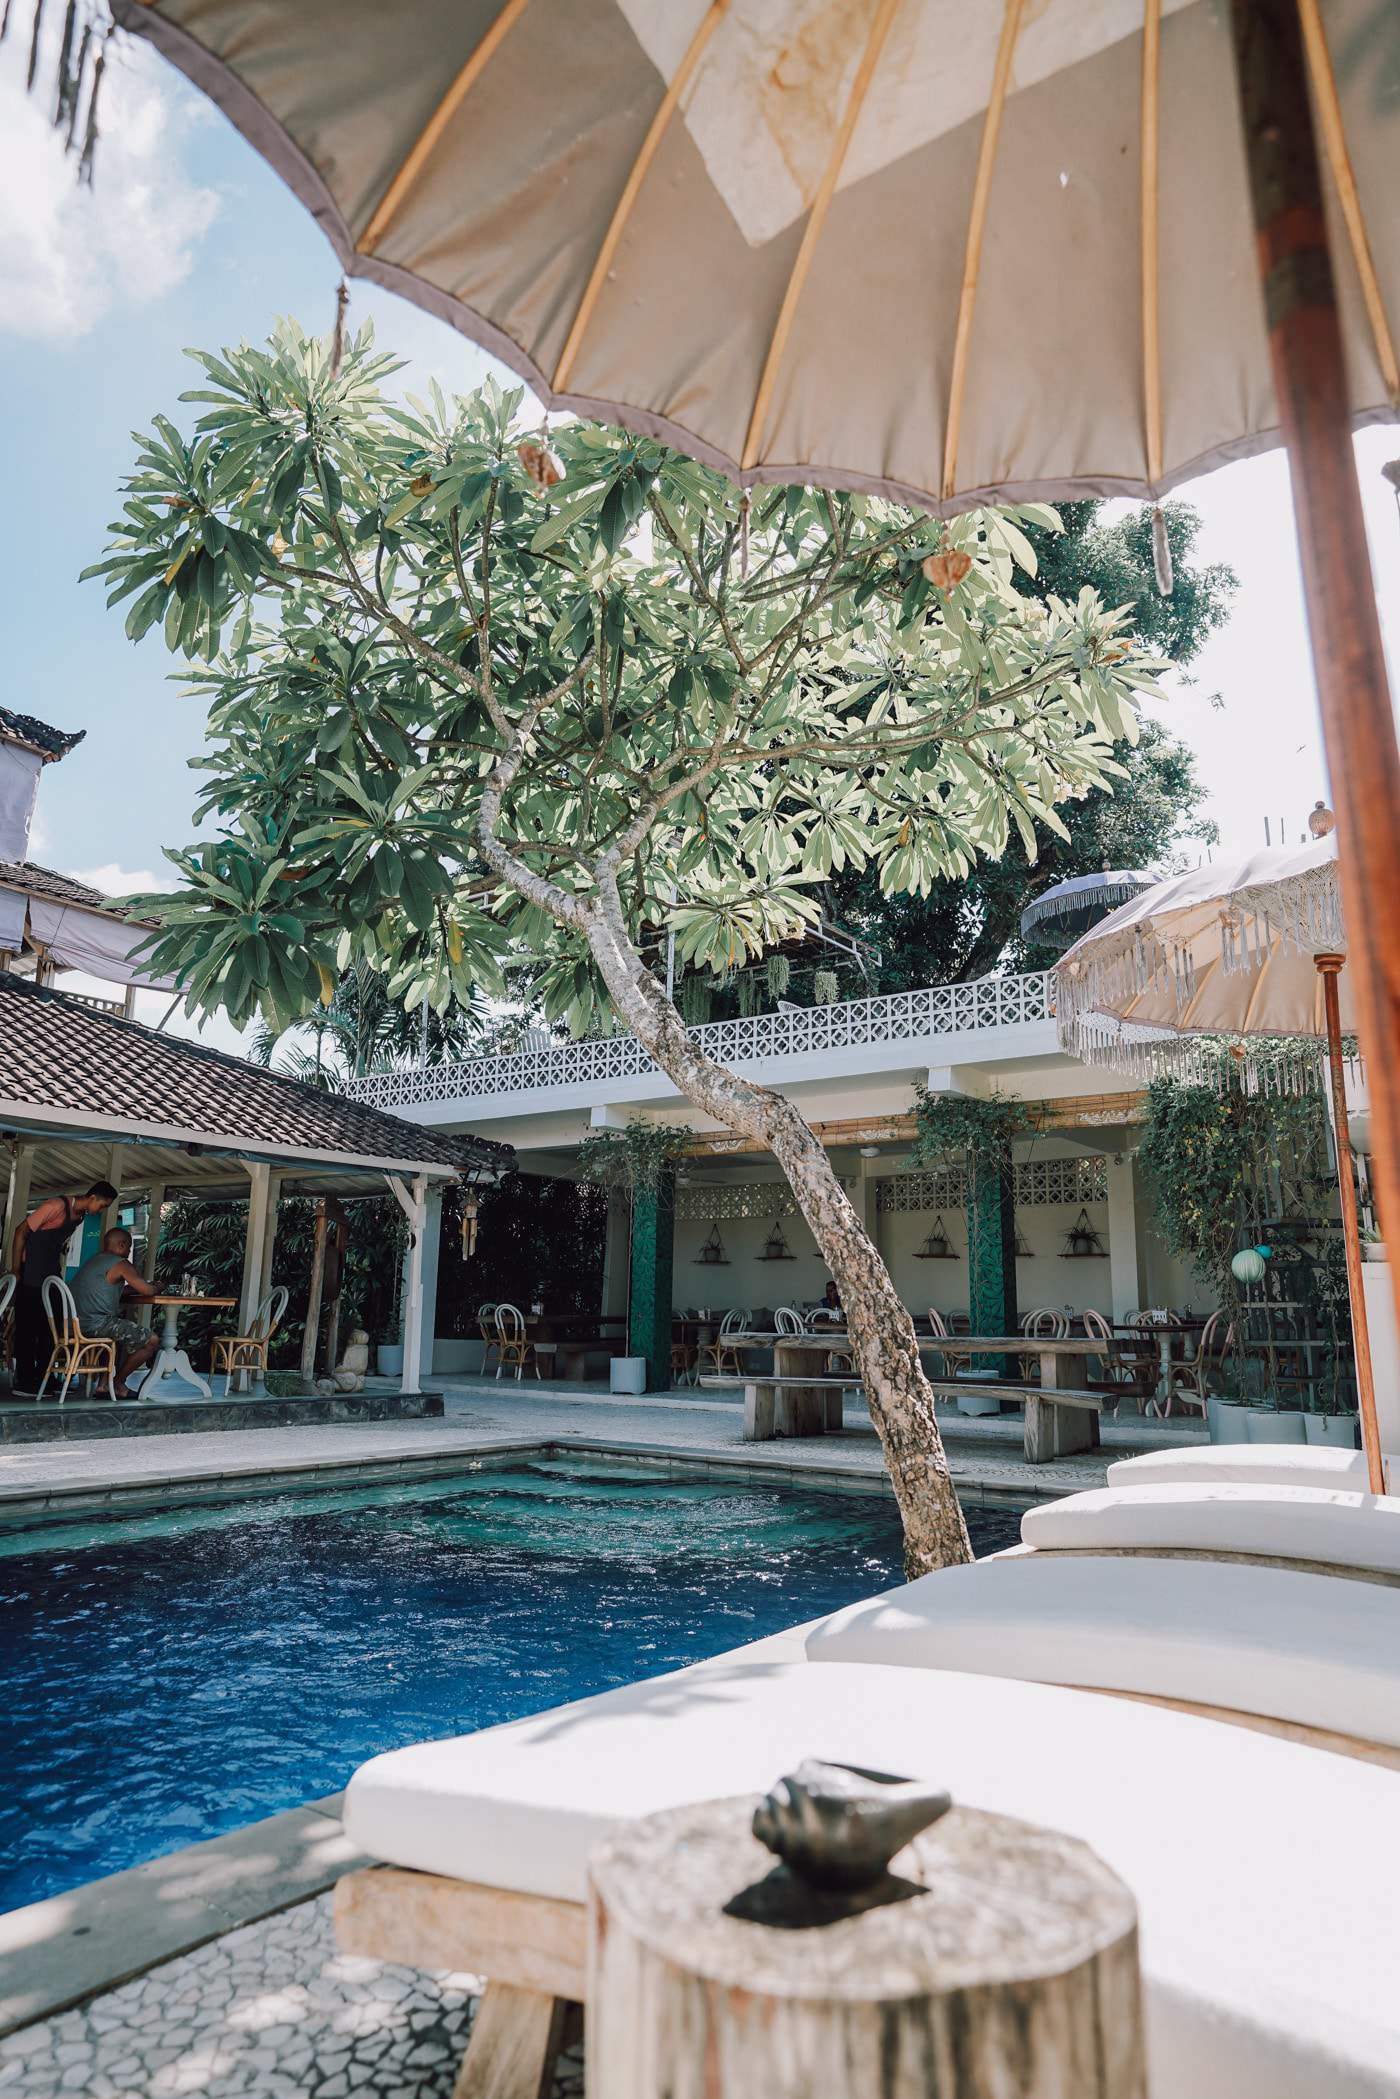 Looking for the best place to stay in Canggu? Looking for great Bali food and an amazing yoga retreat in Bali? Look no further than The Chillhouse Bali and Cassava Poolside café | Travel Bali | Travel Canggu #travelbali #bali #thechillhouse #yogaretreat #baliyoga